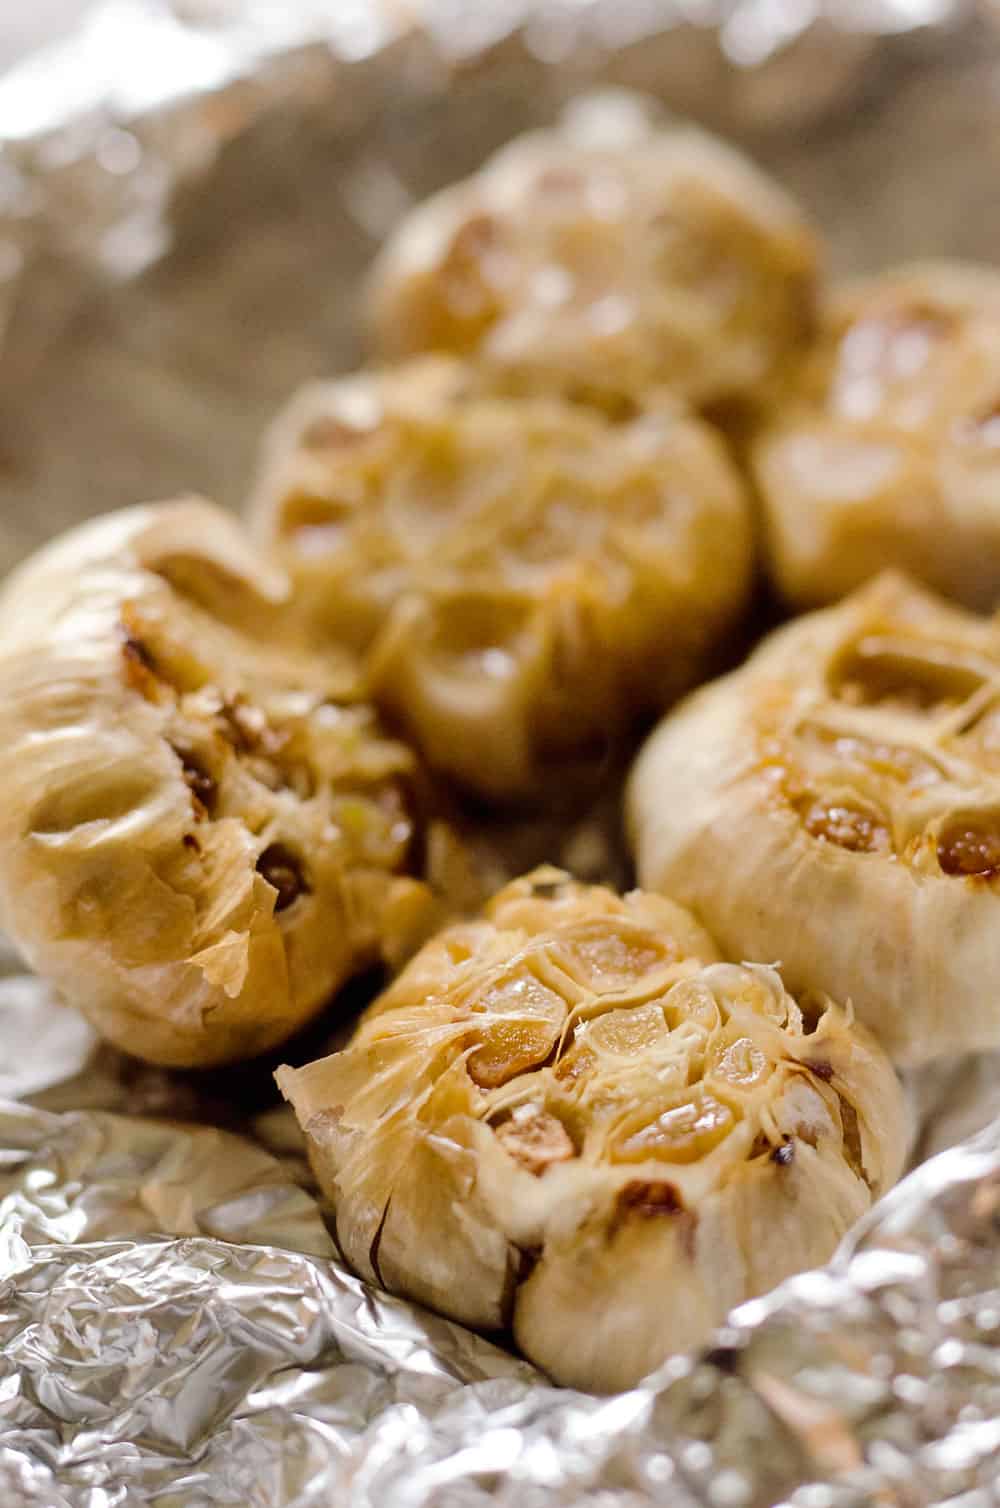 Learn How to Make Roasted Garlic, which is an easy way to add a huge burst of flavor to any dish!